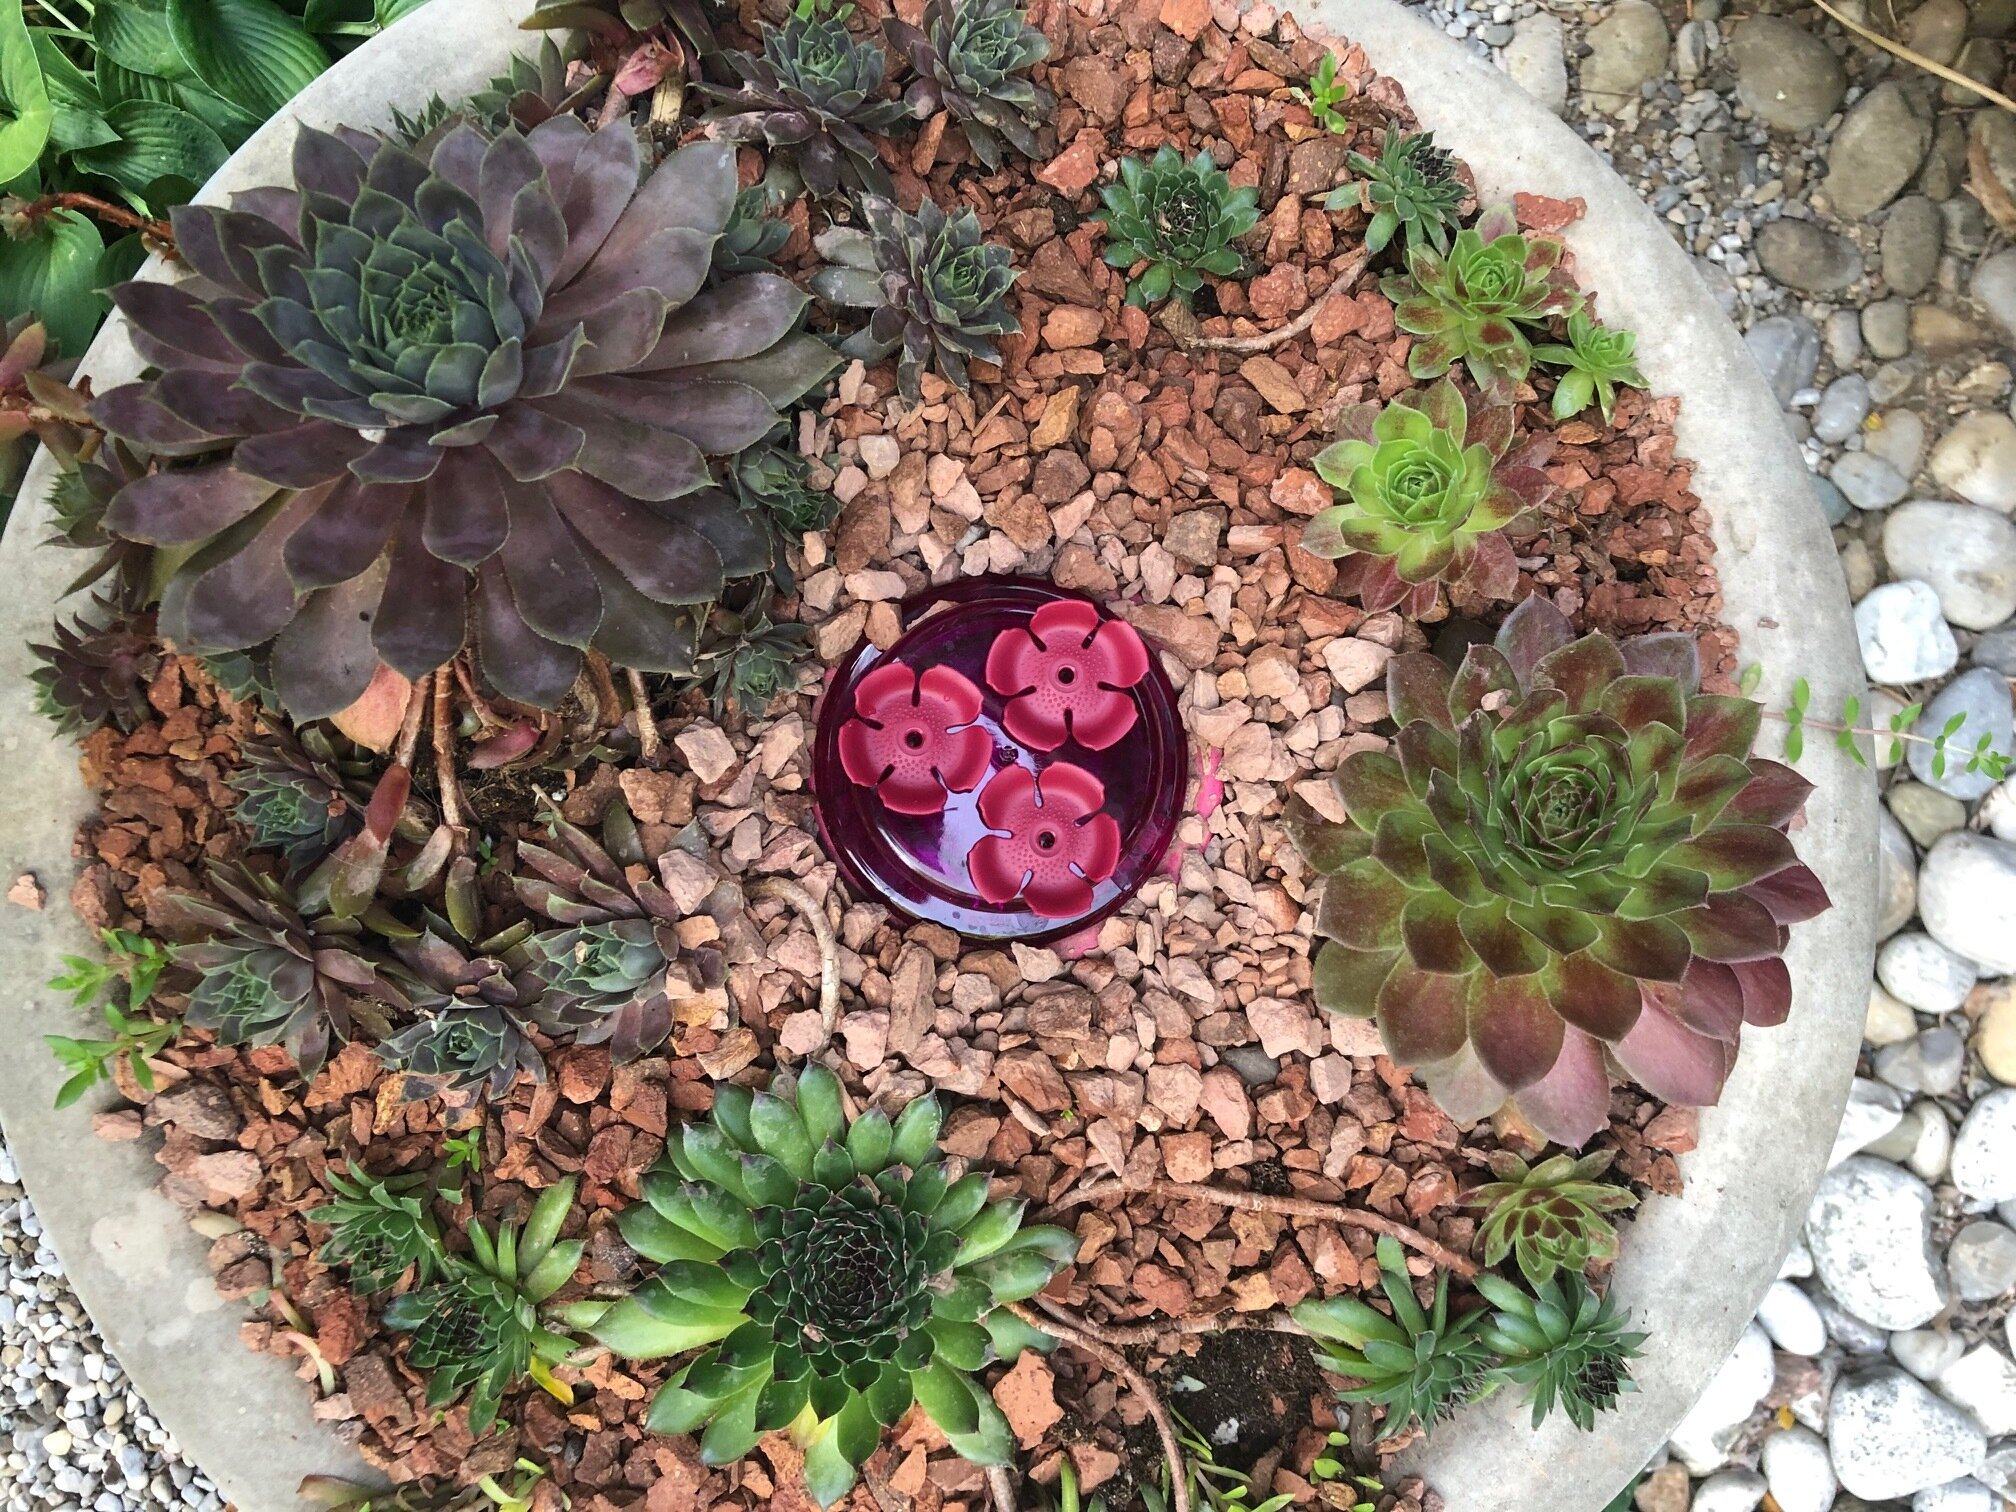 An old bird bath converted to a succulent planter with a twist – a Perky-Pet handhold/tabletop hummingbird feeder is buried in the stone. The set-up was designed as a potential stage for hummingbird photography.